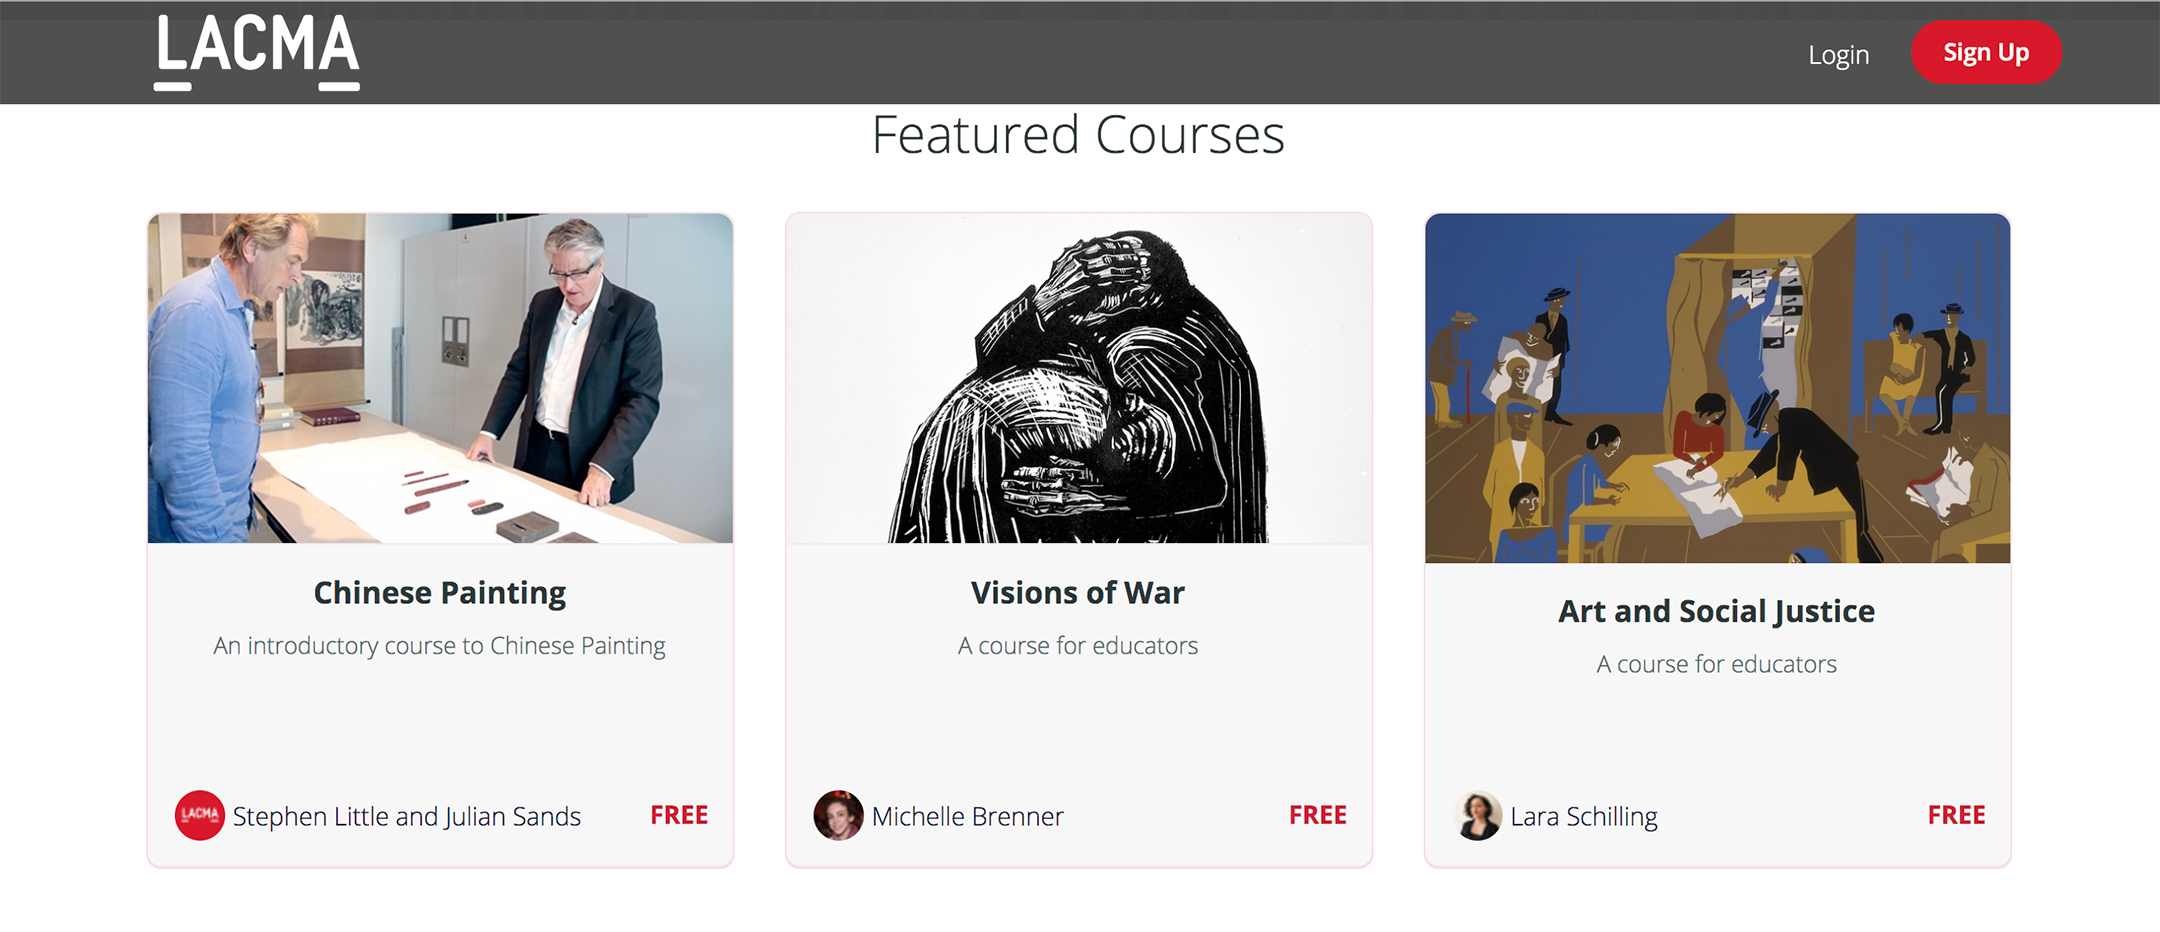 screenshot from the los angeles county museum of art course website showing three featured courses being offered